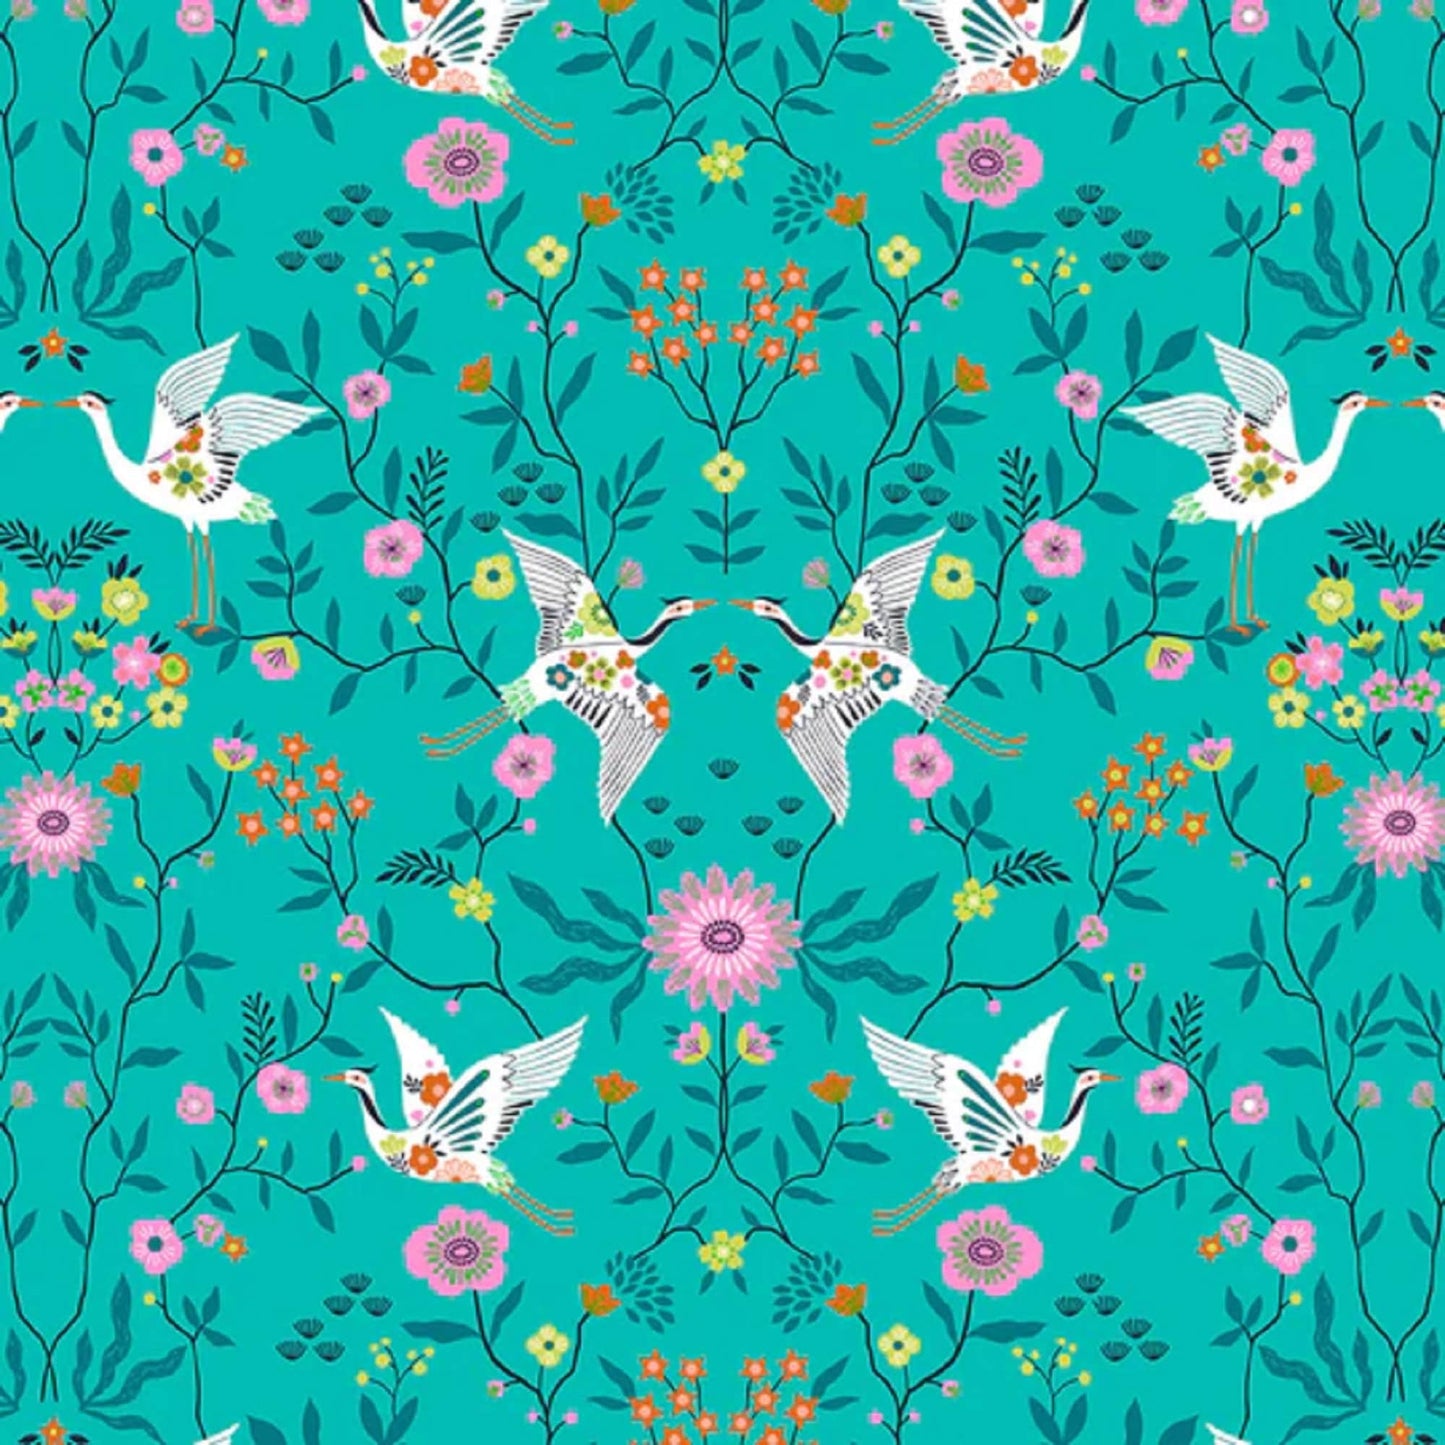 Mirrored Cranes Turquoise Blossom Days Bethan Janine Dashwood Studio Quilters Cotton Fabric Fetish